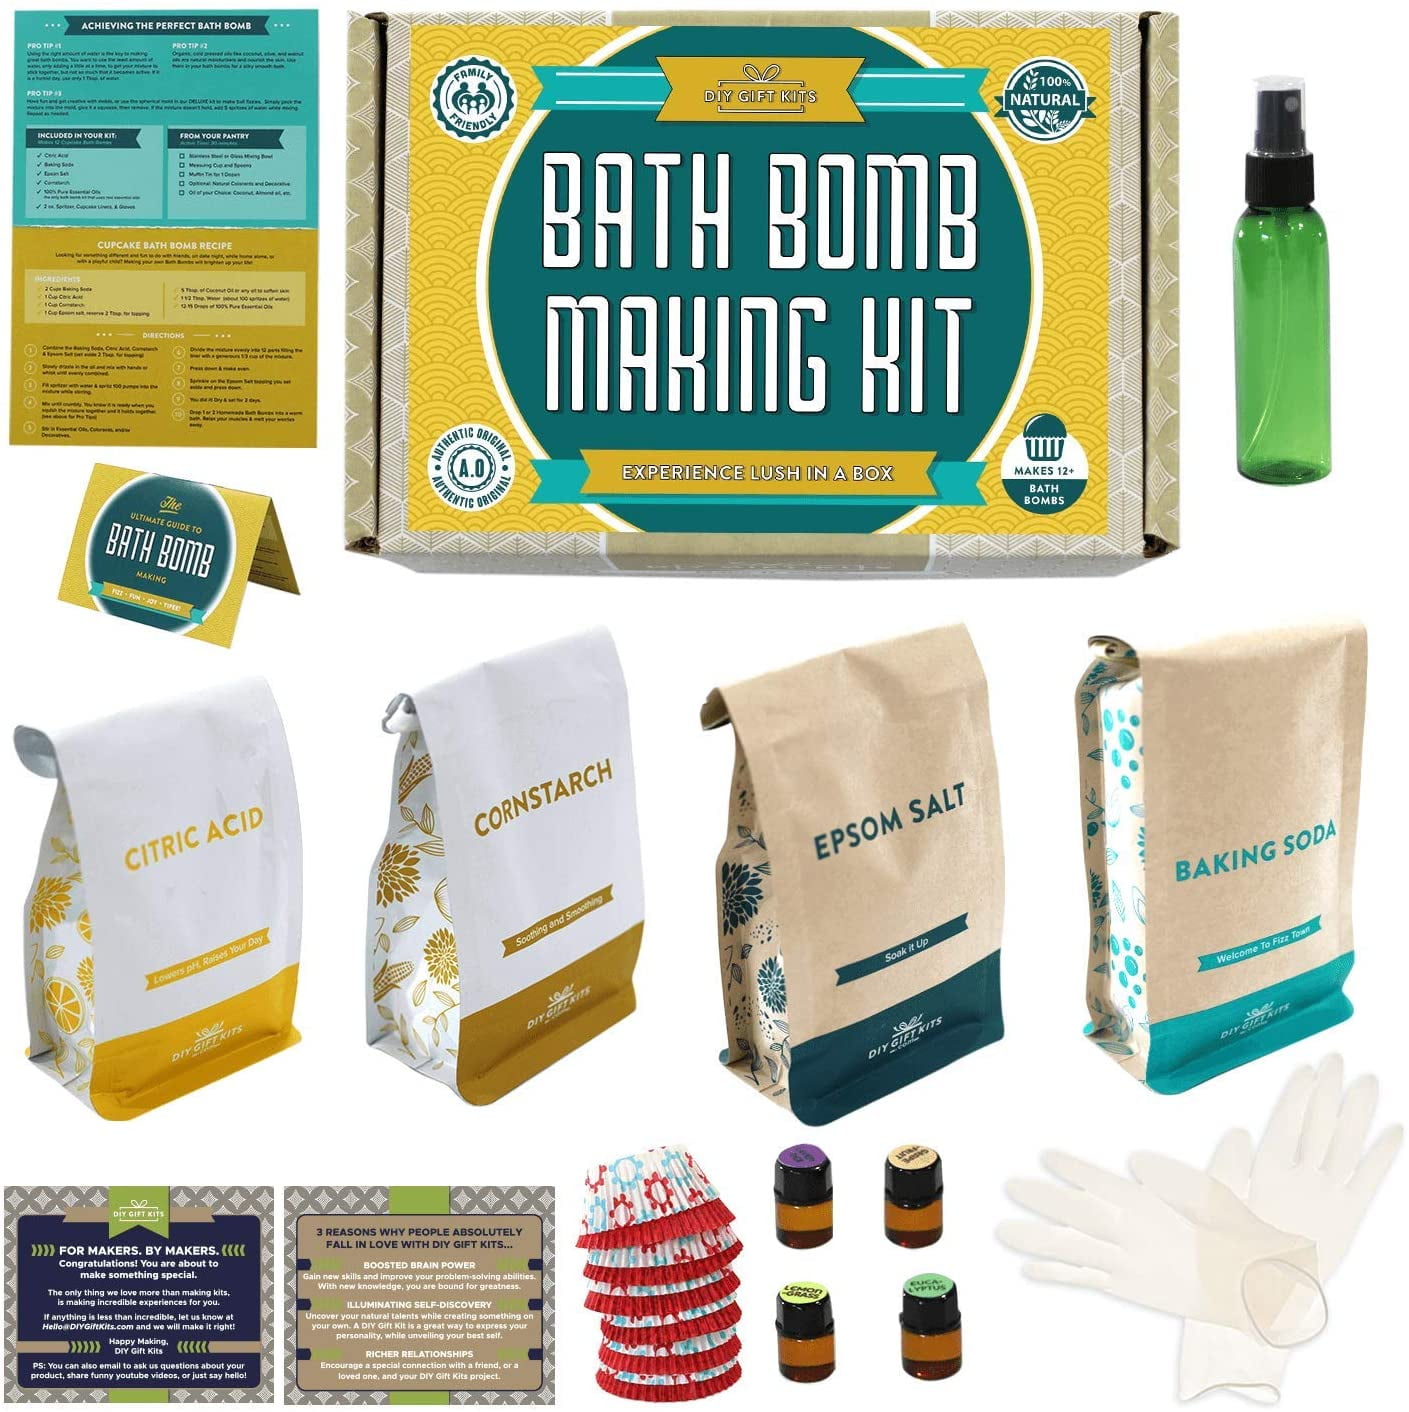 Wholesale Case Pack Earthy Good DIY Bath Bomb Kit (Adults) for your store -  Faire